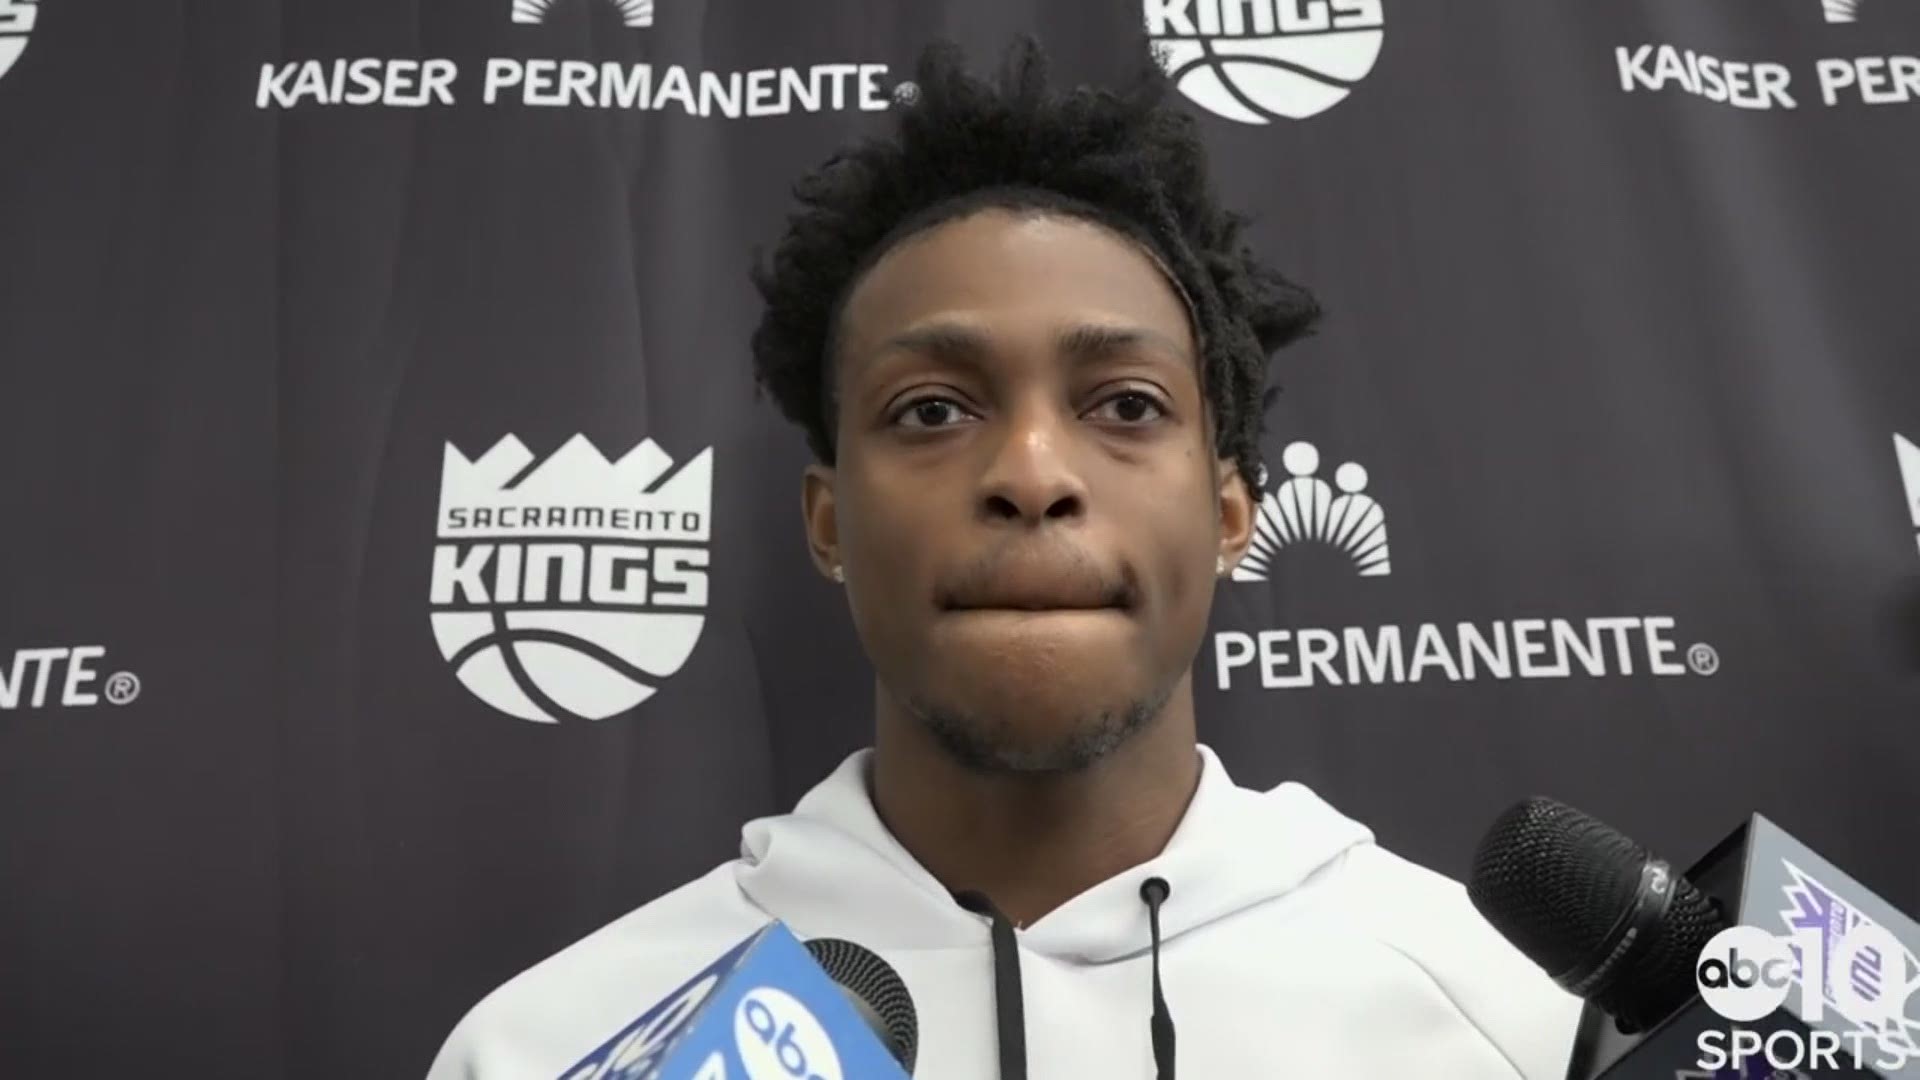 Kings PG De’Aaron Fox discusses his team’s disappointing loss in Phoenix to the Suns to open the season and losing Marvin Bagley III for 4-6 weeks.